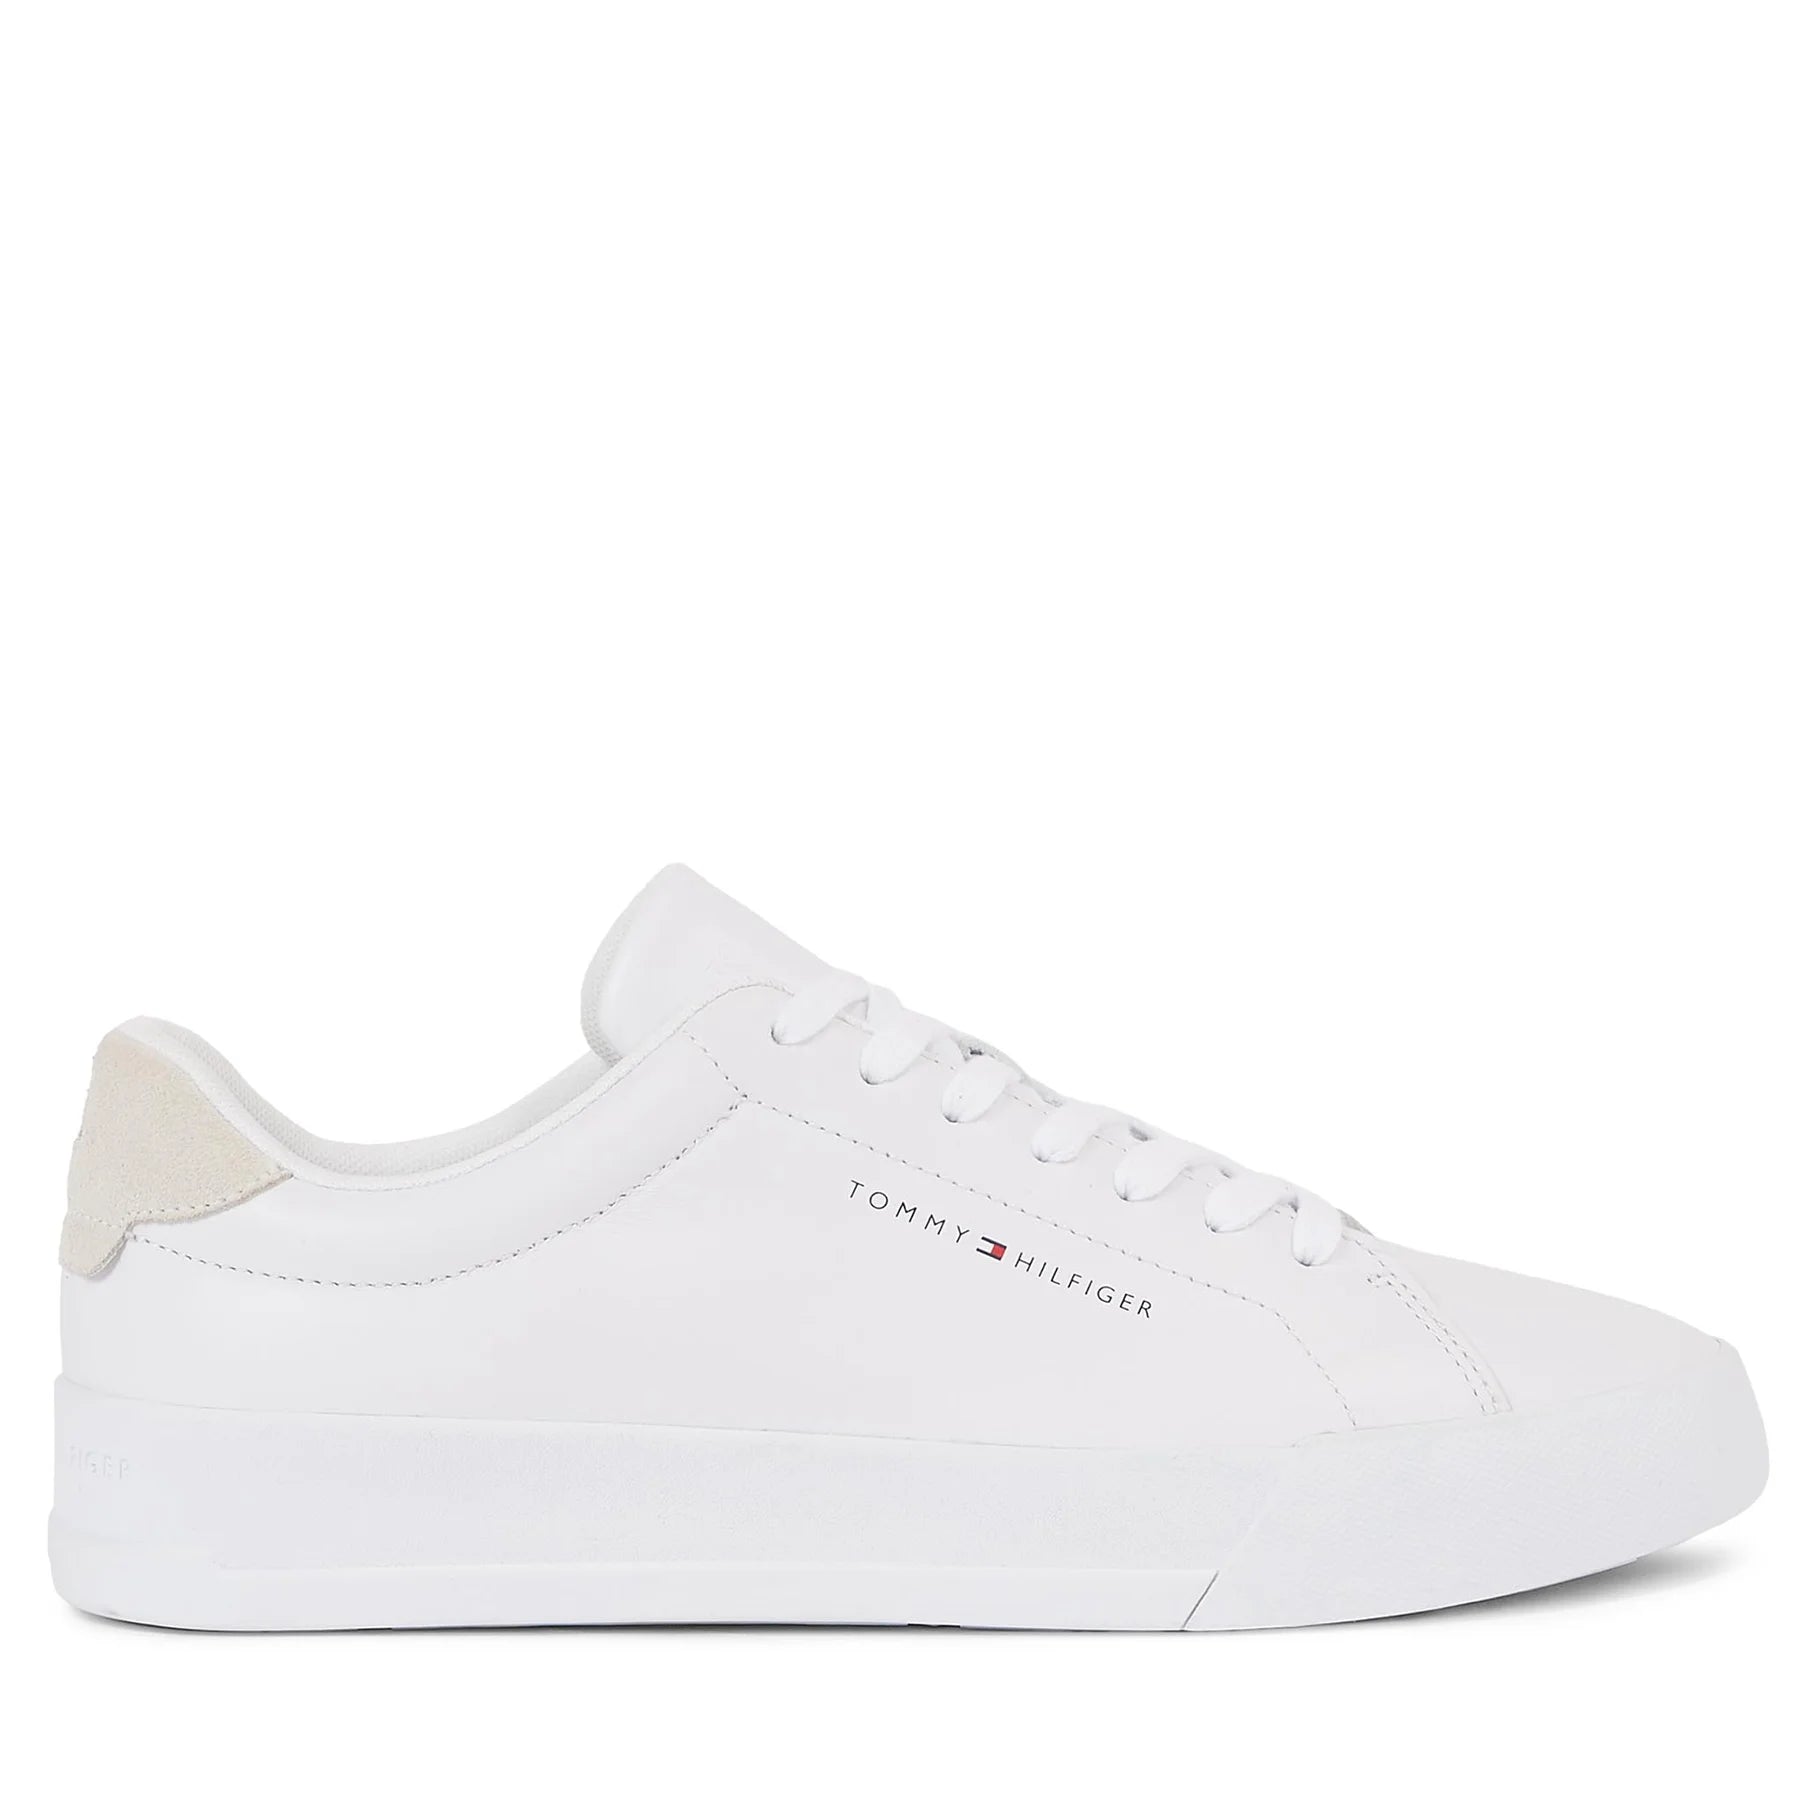 y0iTPkaa0SdHhnefsneakers-tommy-hilfiger-th-court-leather-fm0fm04971-white-ybs-0000303772918.jpg